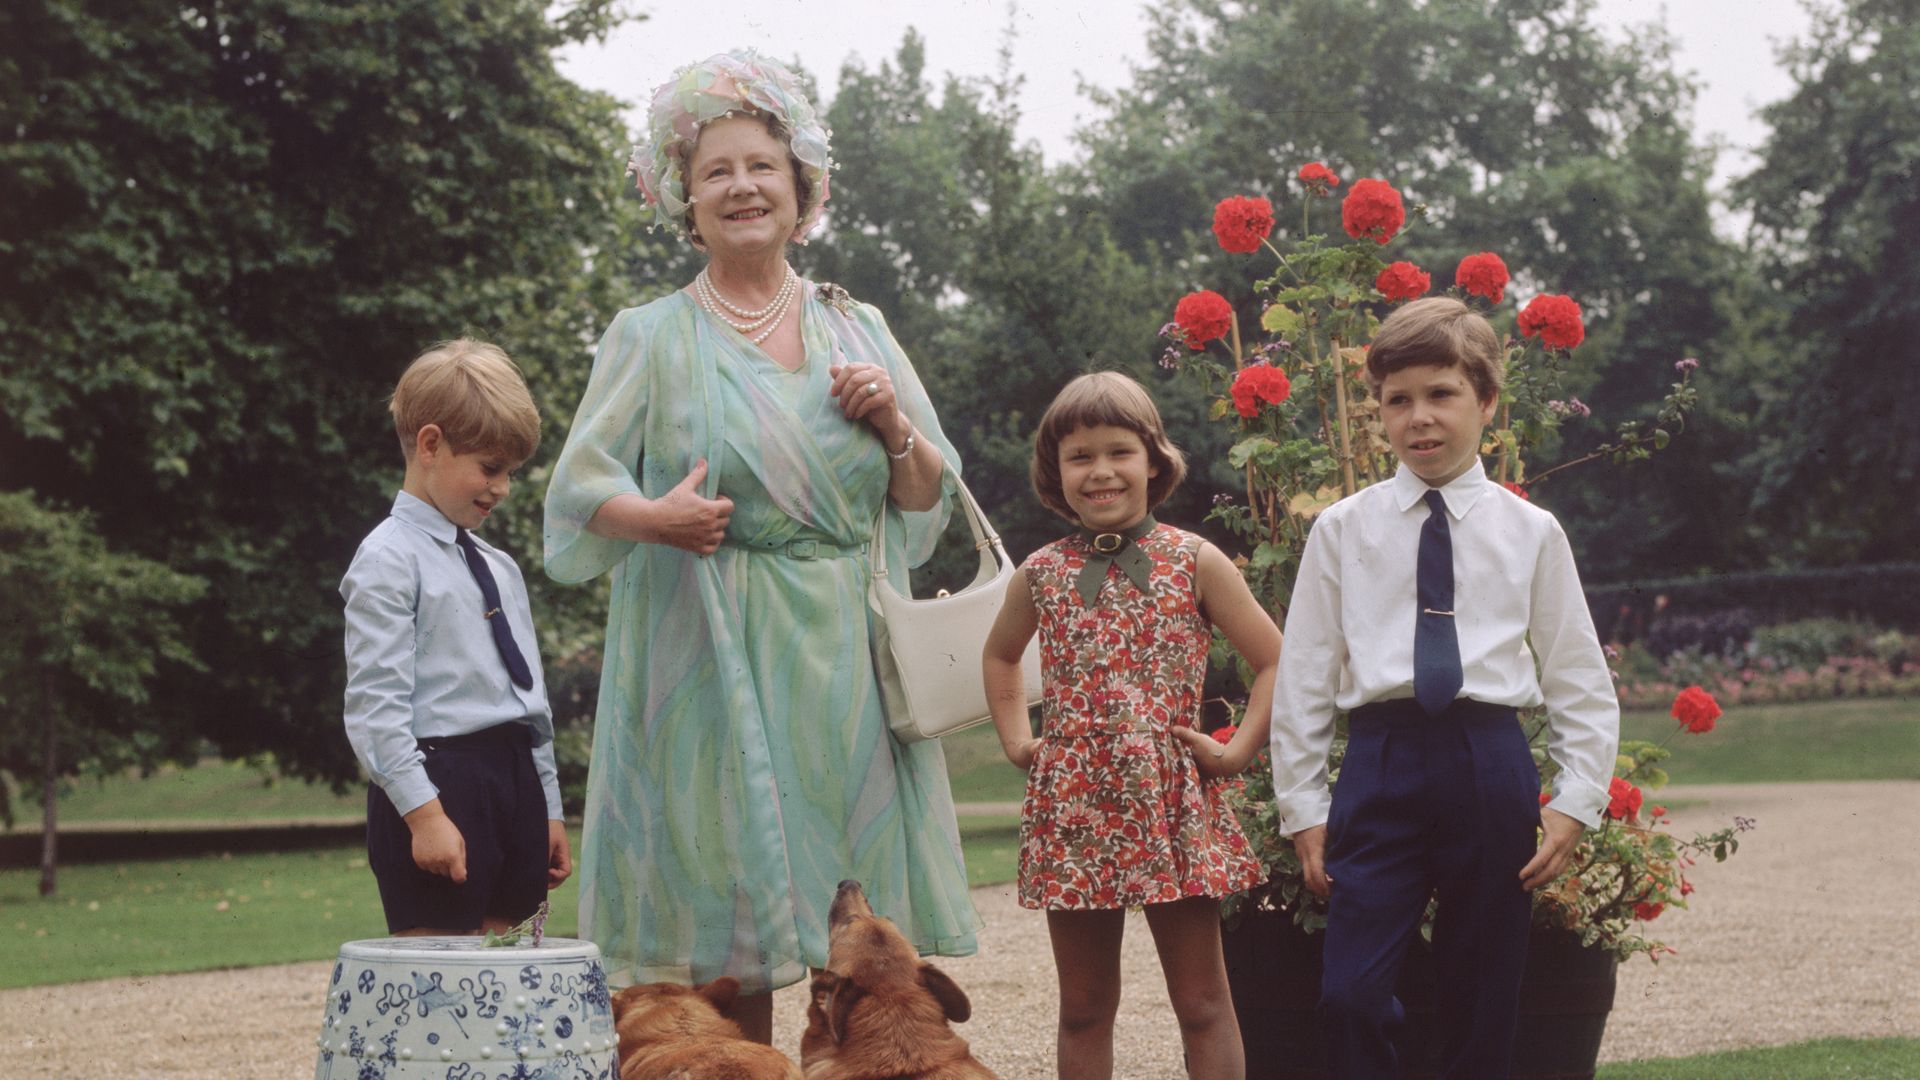 A young prince Edward with the Queen Mother, Lady Sarah Chatto and David Armstrong-Jones